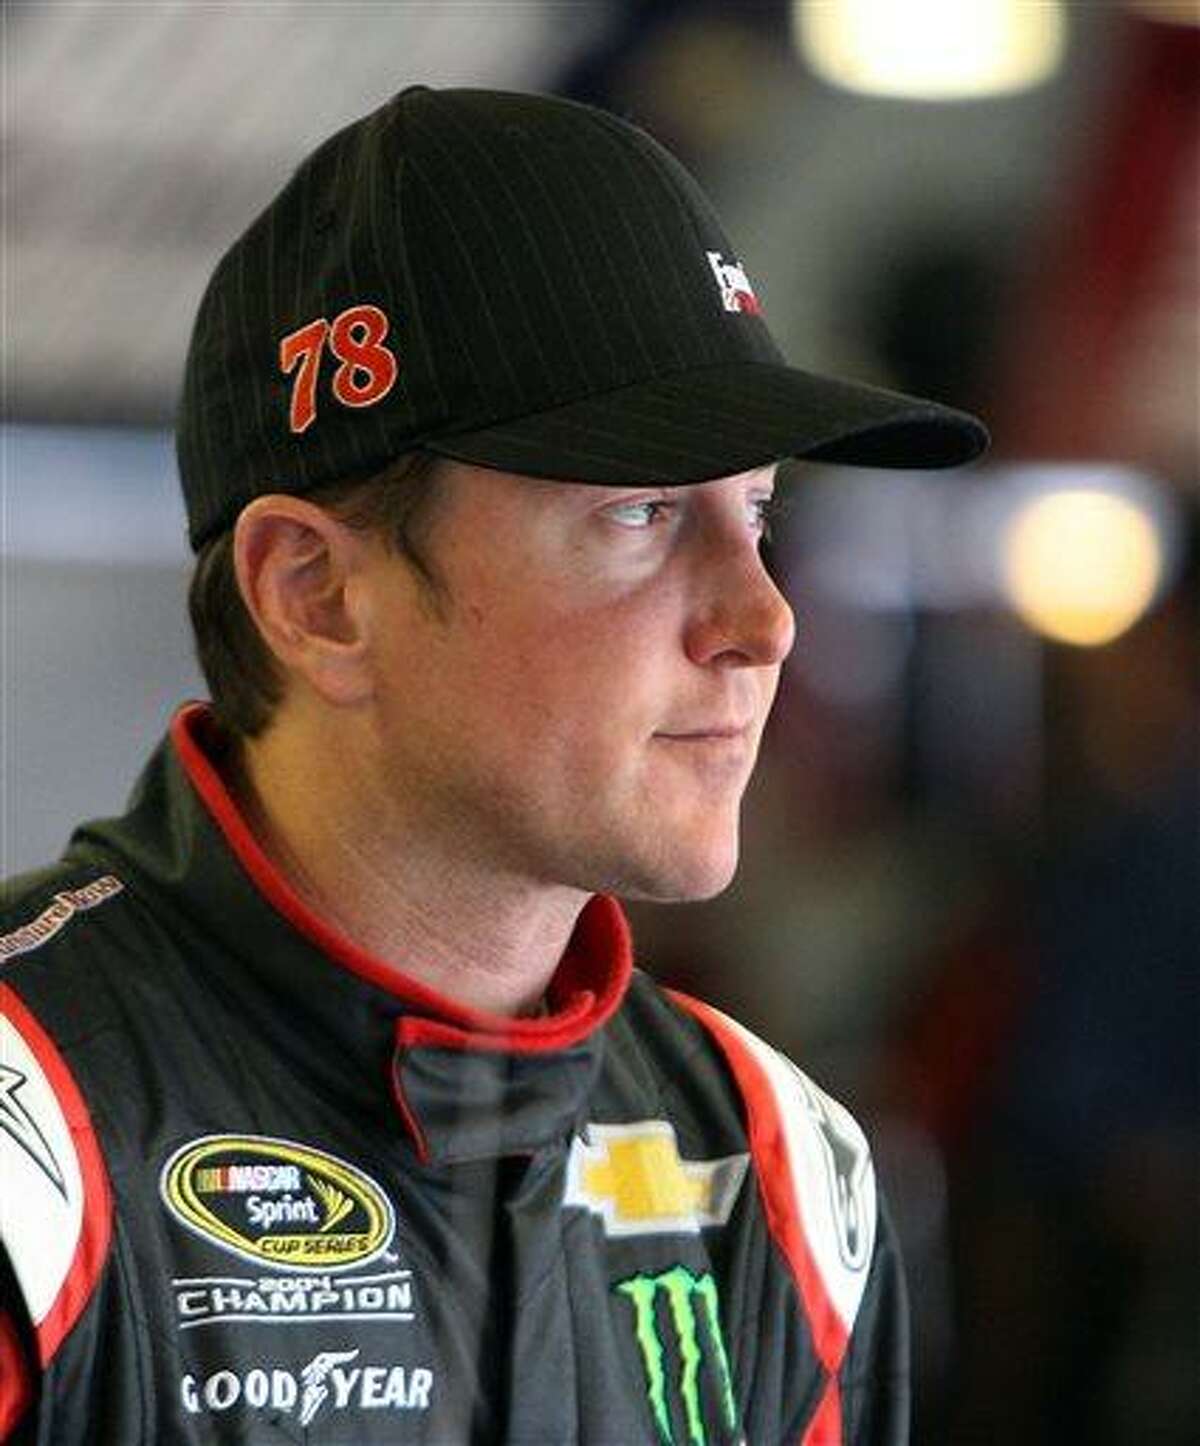 Kurt Busch gets ready for the final practice before Sunday's NASCAR Sprint Cup auto race at New Hampshire Motor Speedway, Saturday, July 13, 2013 in Loudon, N.H. (AP Photo/Jim Cole)